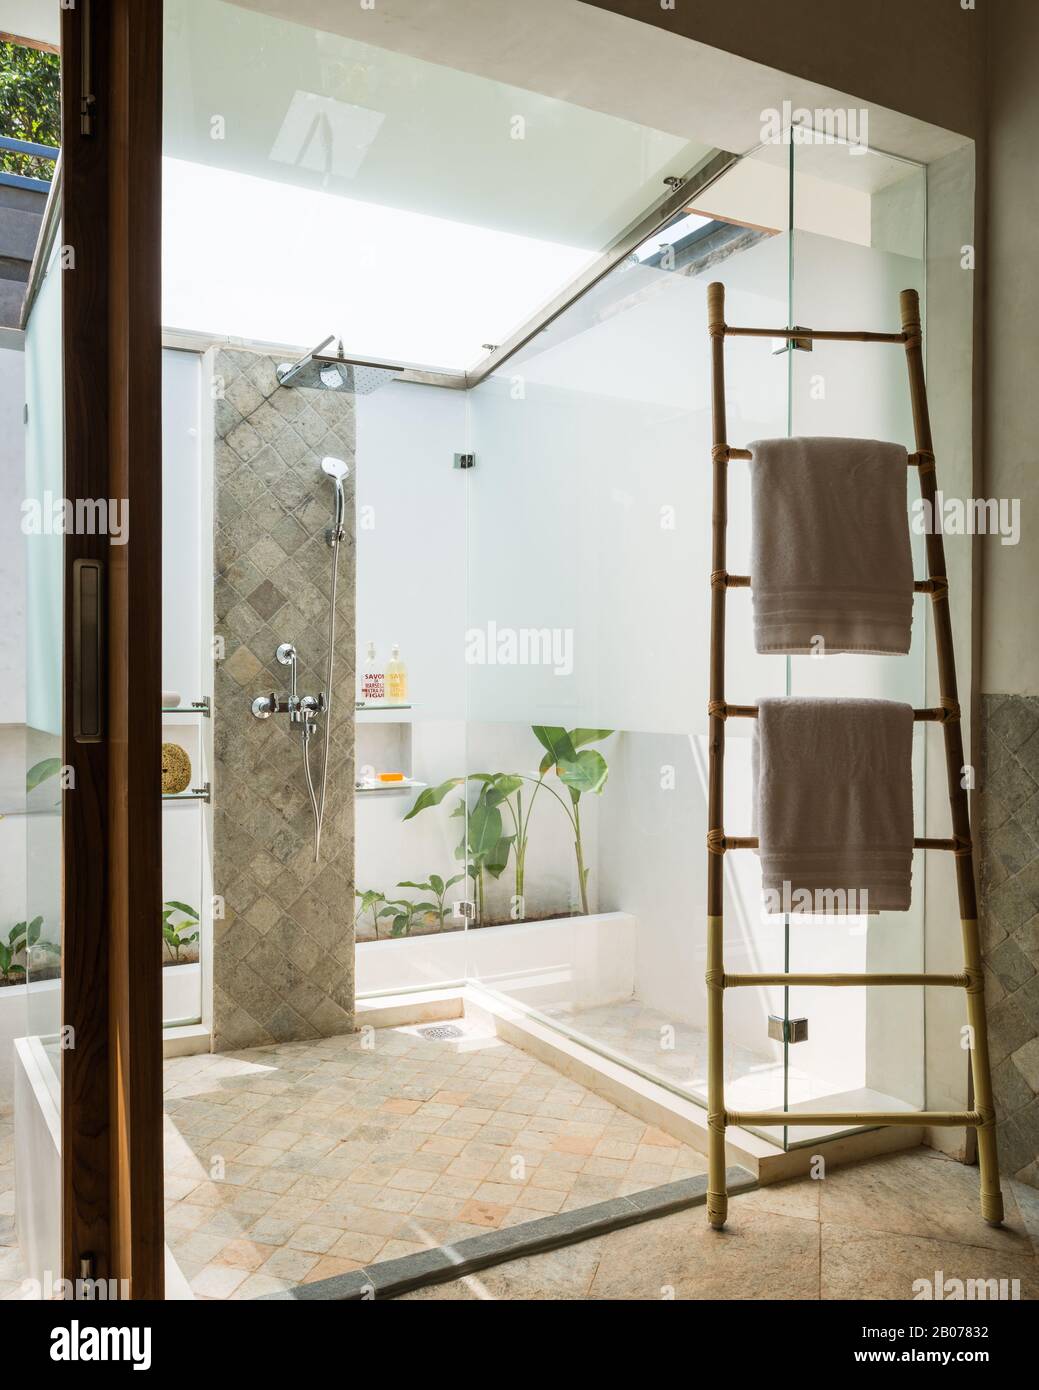 Glass shower protruding into courtyard Stock Photo